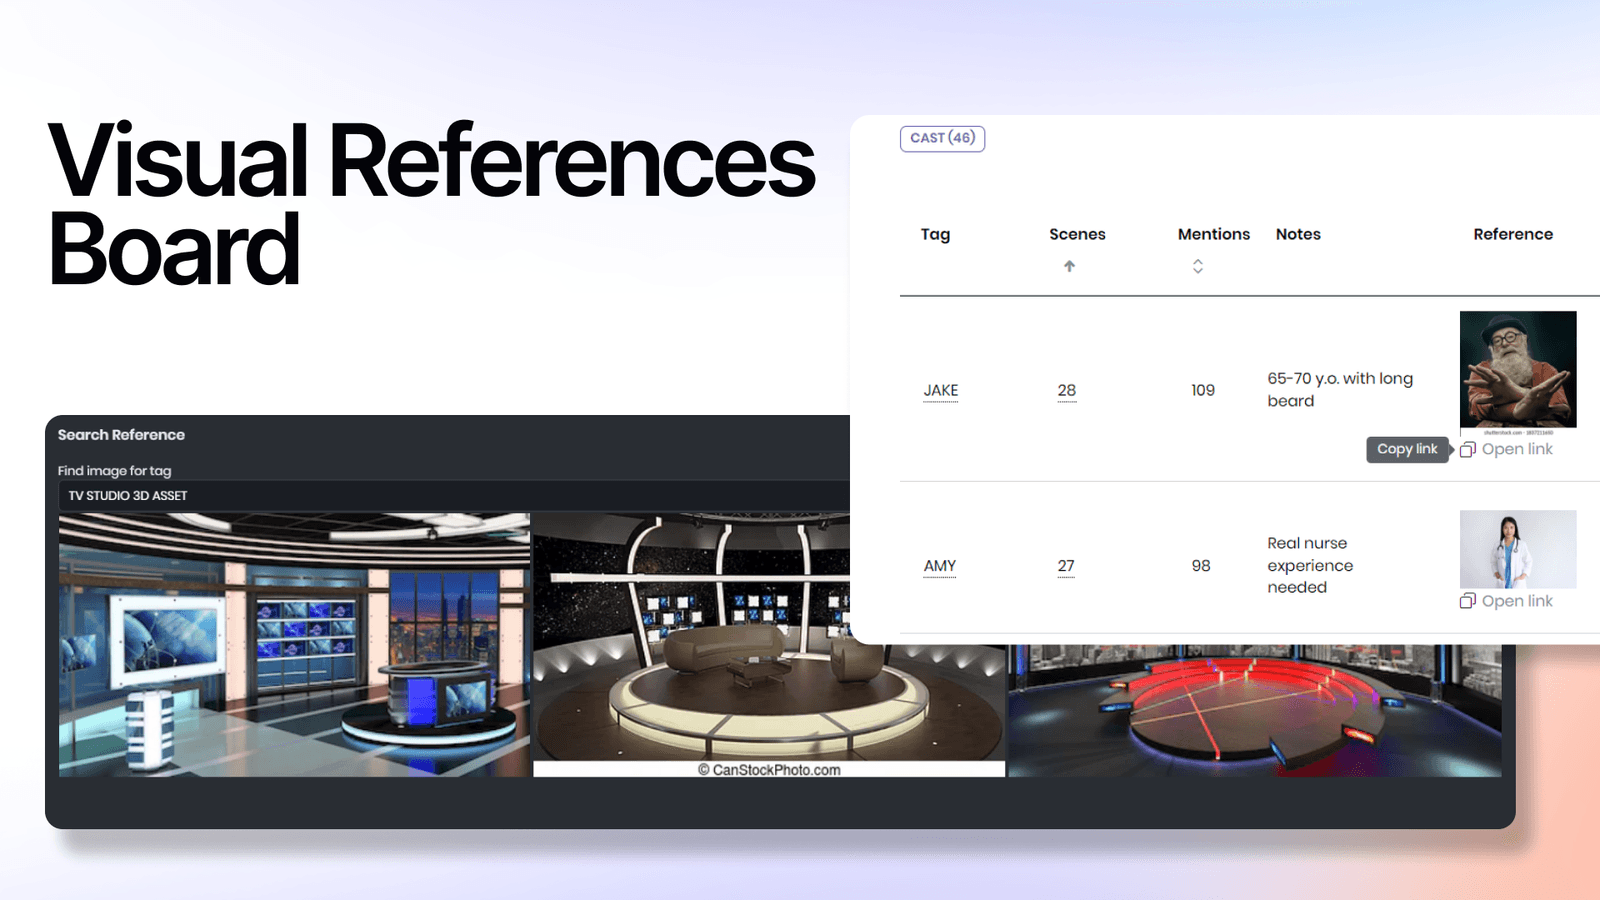 Filmustage update: New Visual References board, Total Summary, and Notes 2.0 features